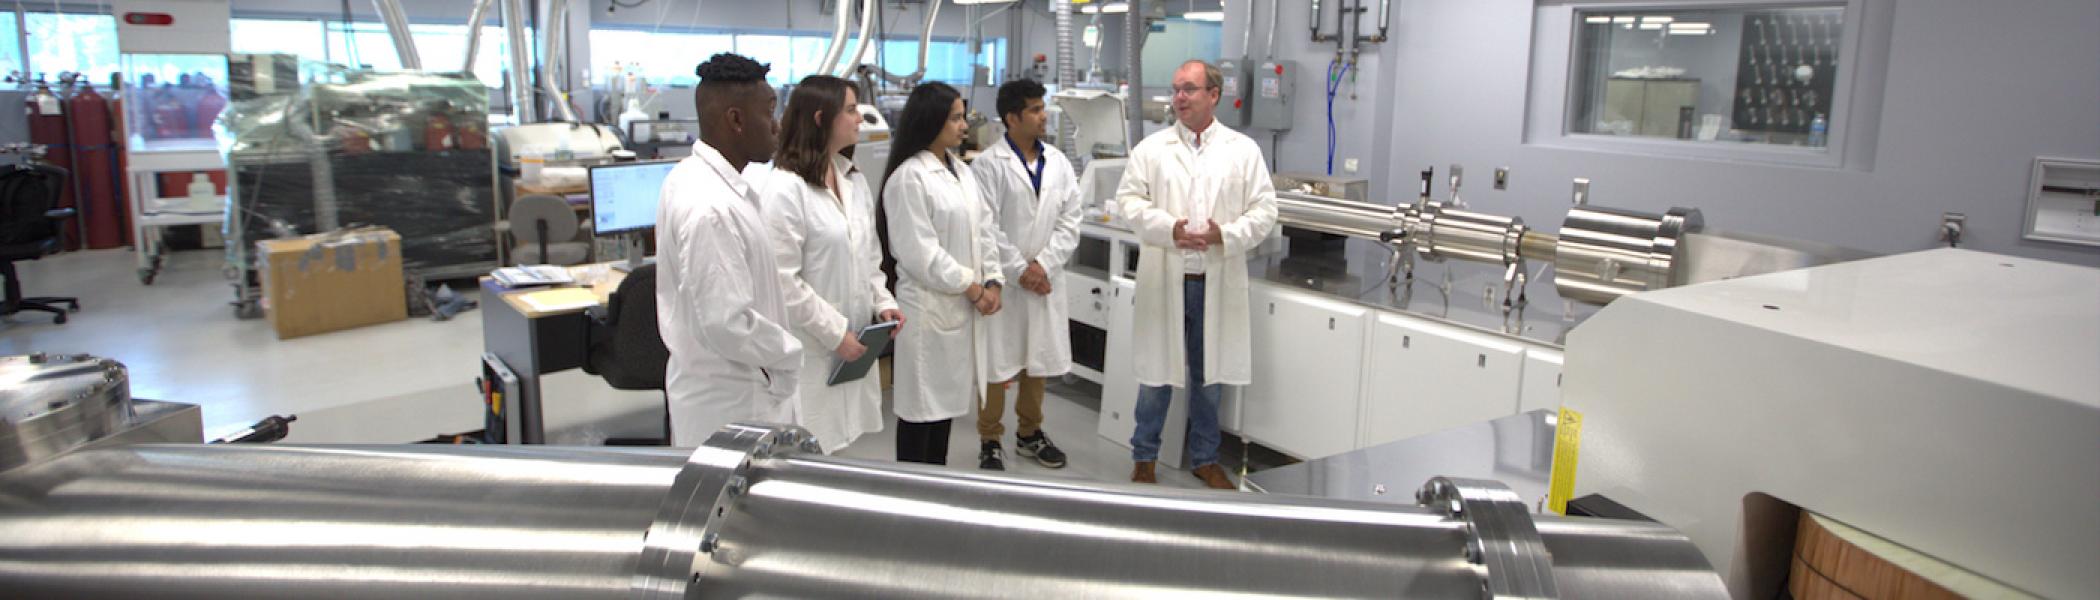 A group of students in lab coats standing with a professor in a lab